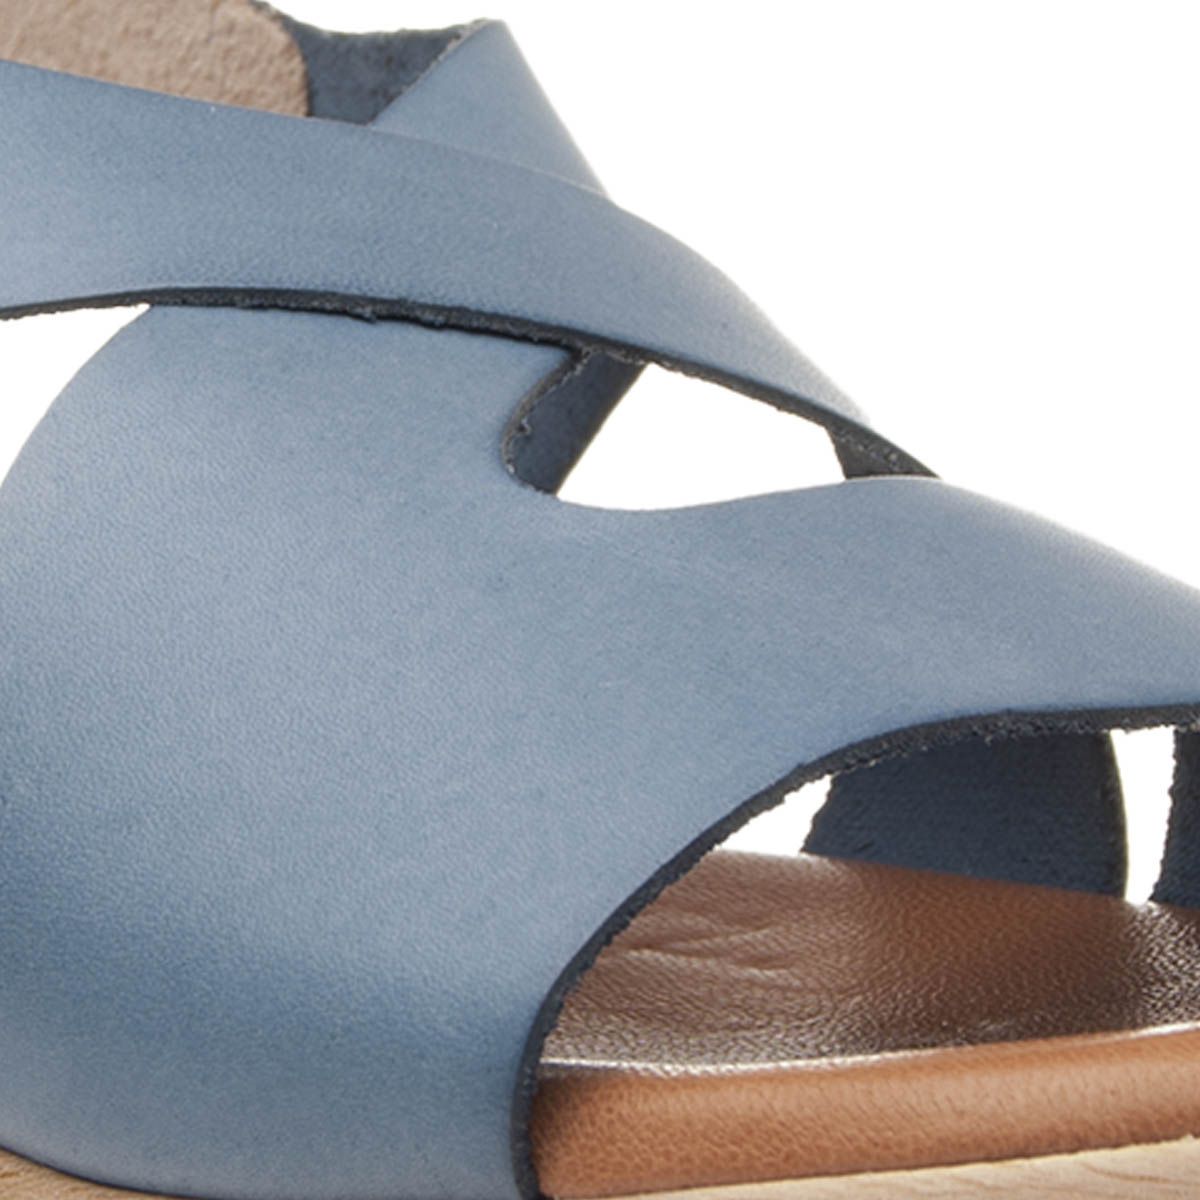 These new sandals meet everything you need to make your summer perfect. Perfect combination between quality, community and design. Manufactured 100% in leather, with padded plant also made of skin and non-slip and light polyurethane sole, nothing weigh. Its combinations of colors and textures make these sandals unique pieces very top and easy to combine. Natural skin, ergonomic, flexible, footprint effect, soft, absorbent, breathable, shock Absorbing, lightweight and anti-slip..Description Technical: External materialNeatural Leatherial Interior: Natural Leather.Material Plant: Natural Leather.Material Sole: Polyurethane. . East Platform: 3,5.Tight Heel: 0.Ture Bag0.Proofundity Bag